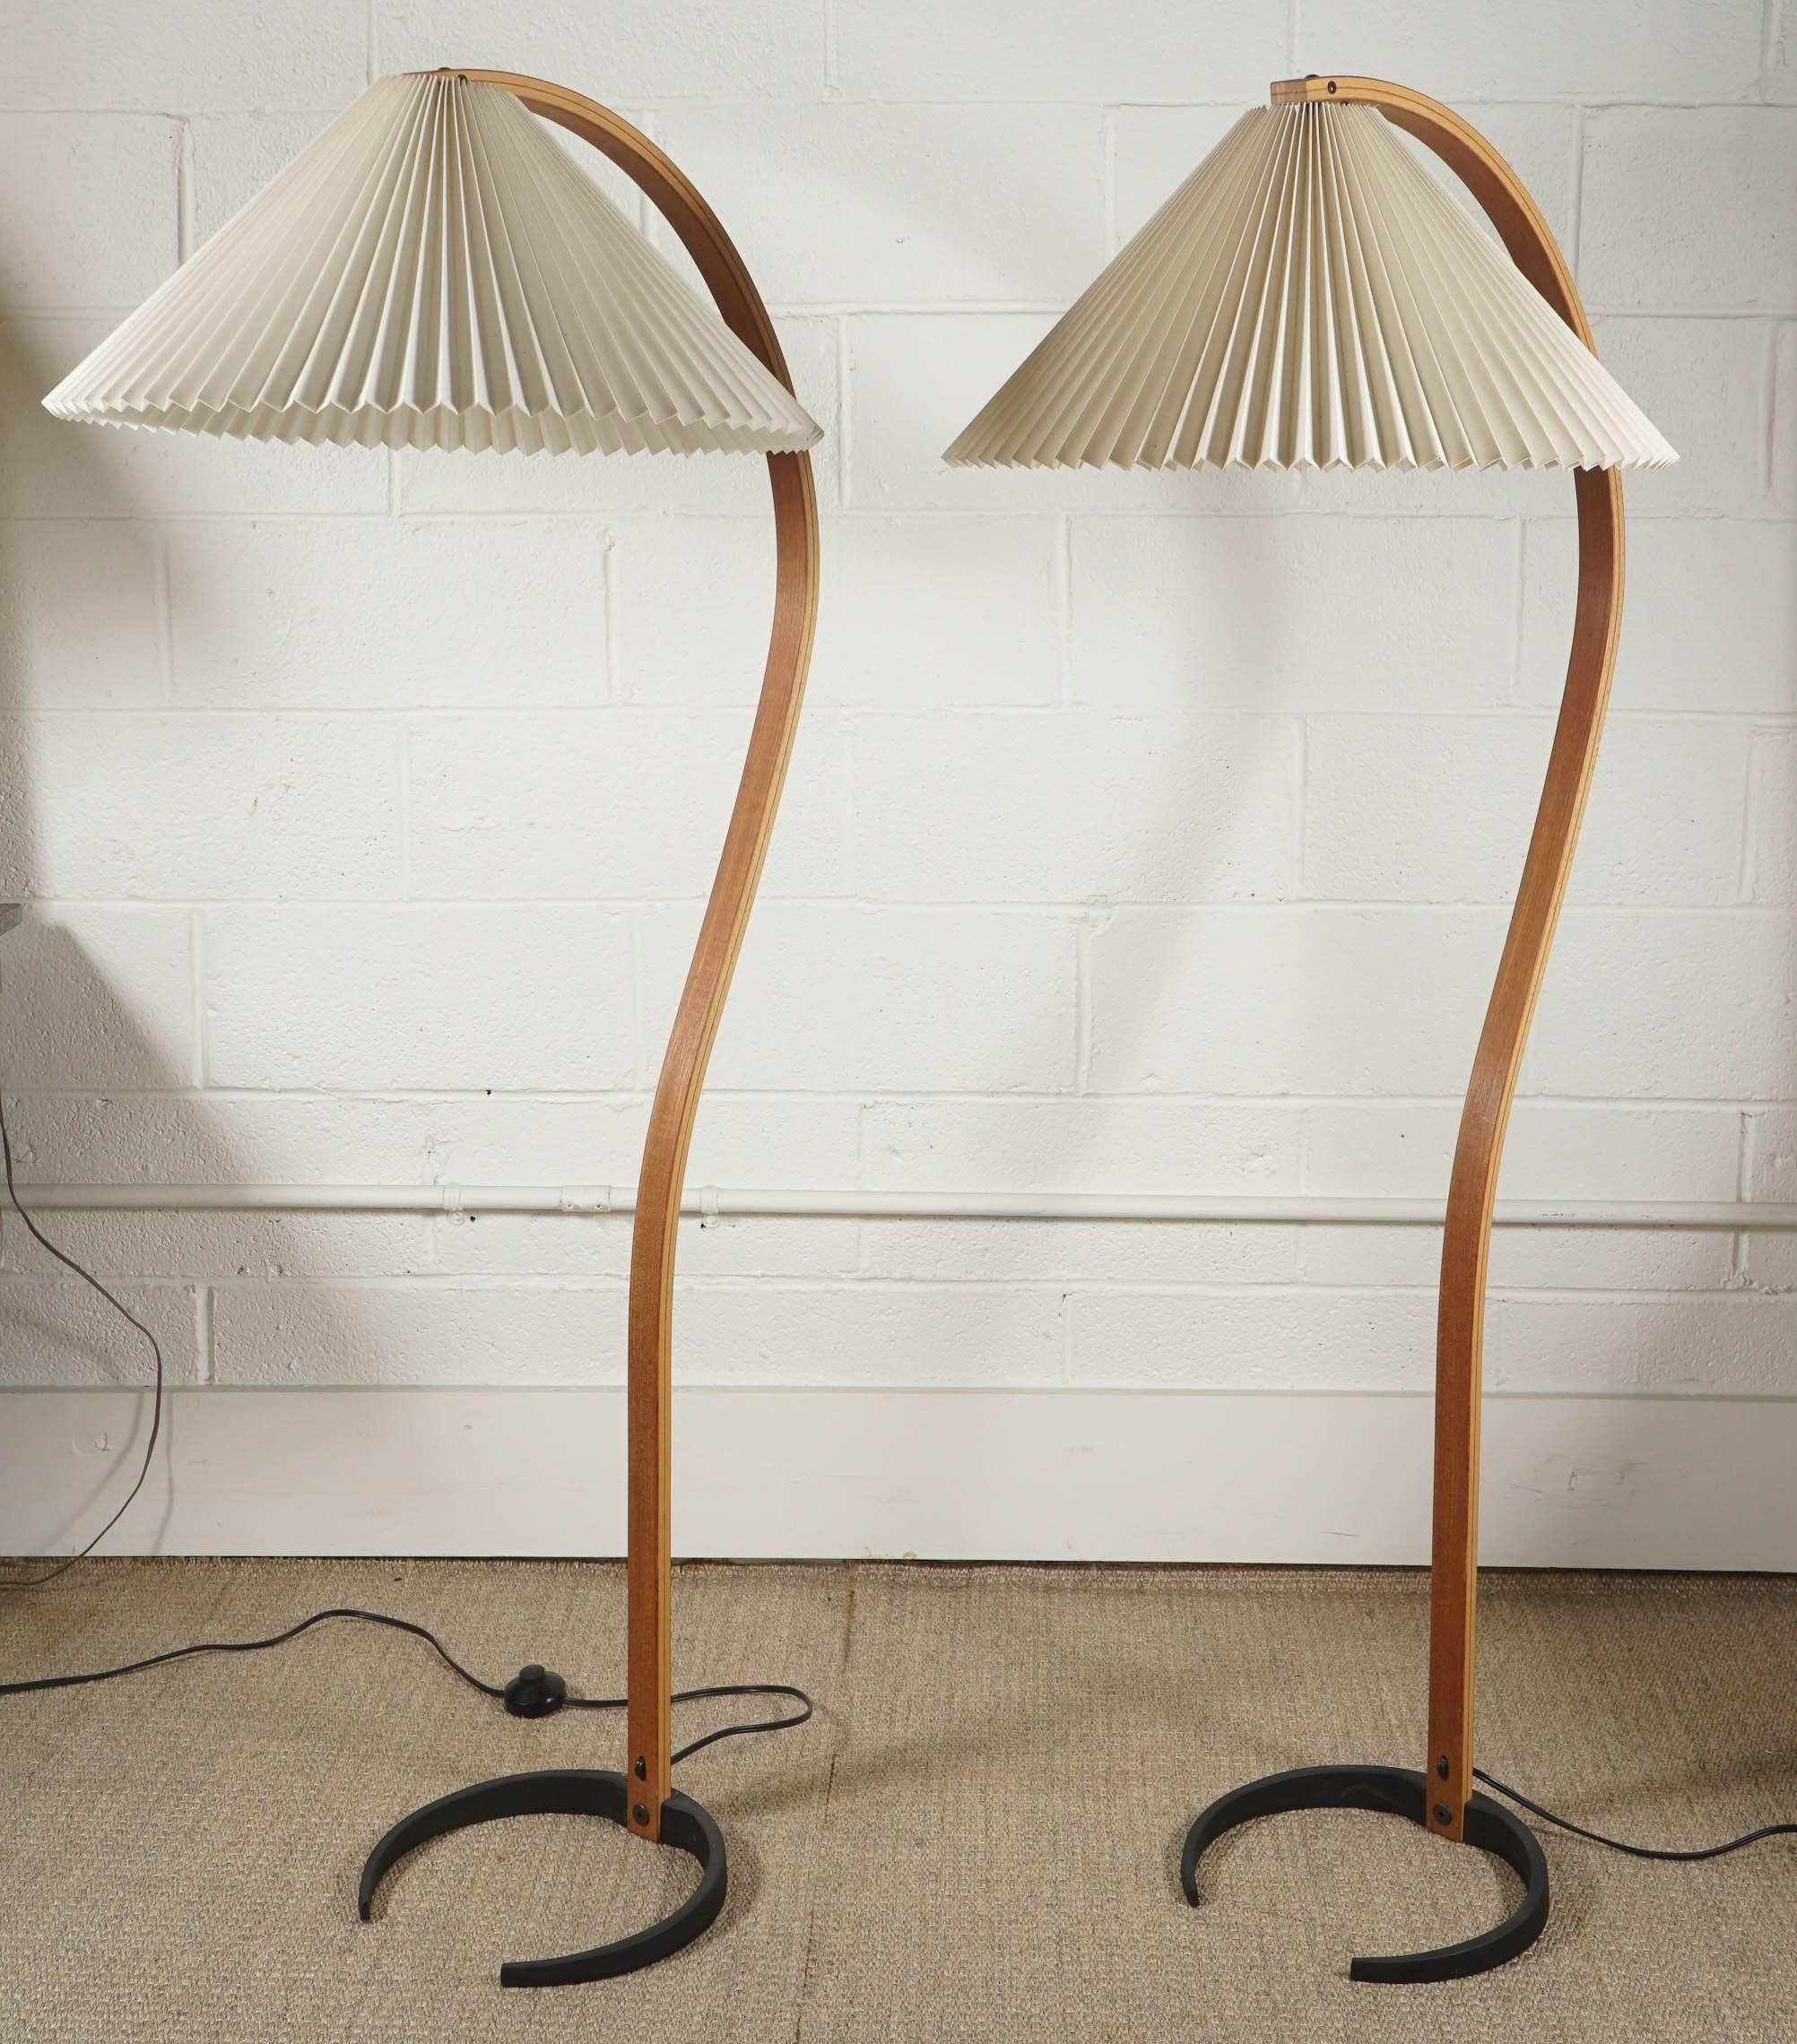 Here is a pair of Caprani standing lamps with a bentwood base. The pleated shades are original and in very clean condition. The base is iron with the mark Caprani. Available as a pair or as singles for $1,800. Each.